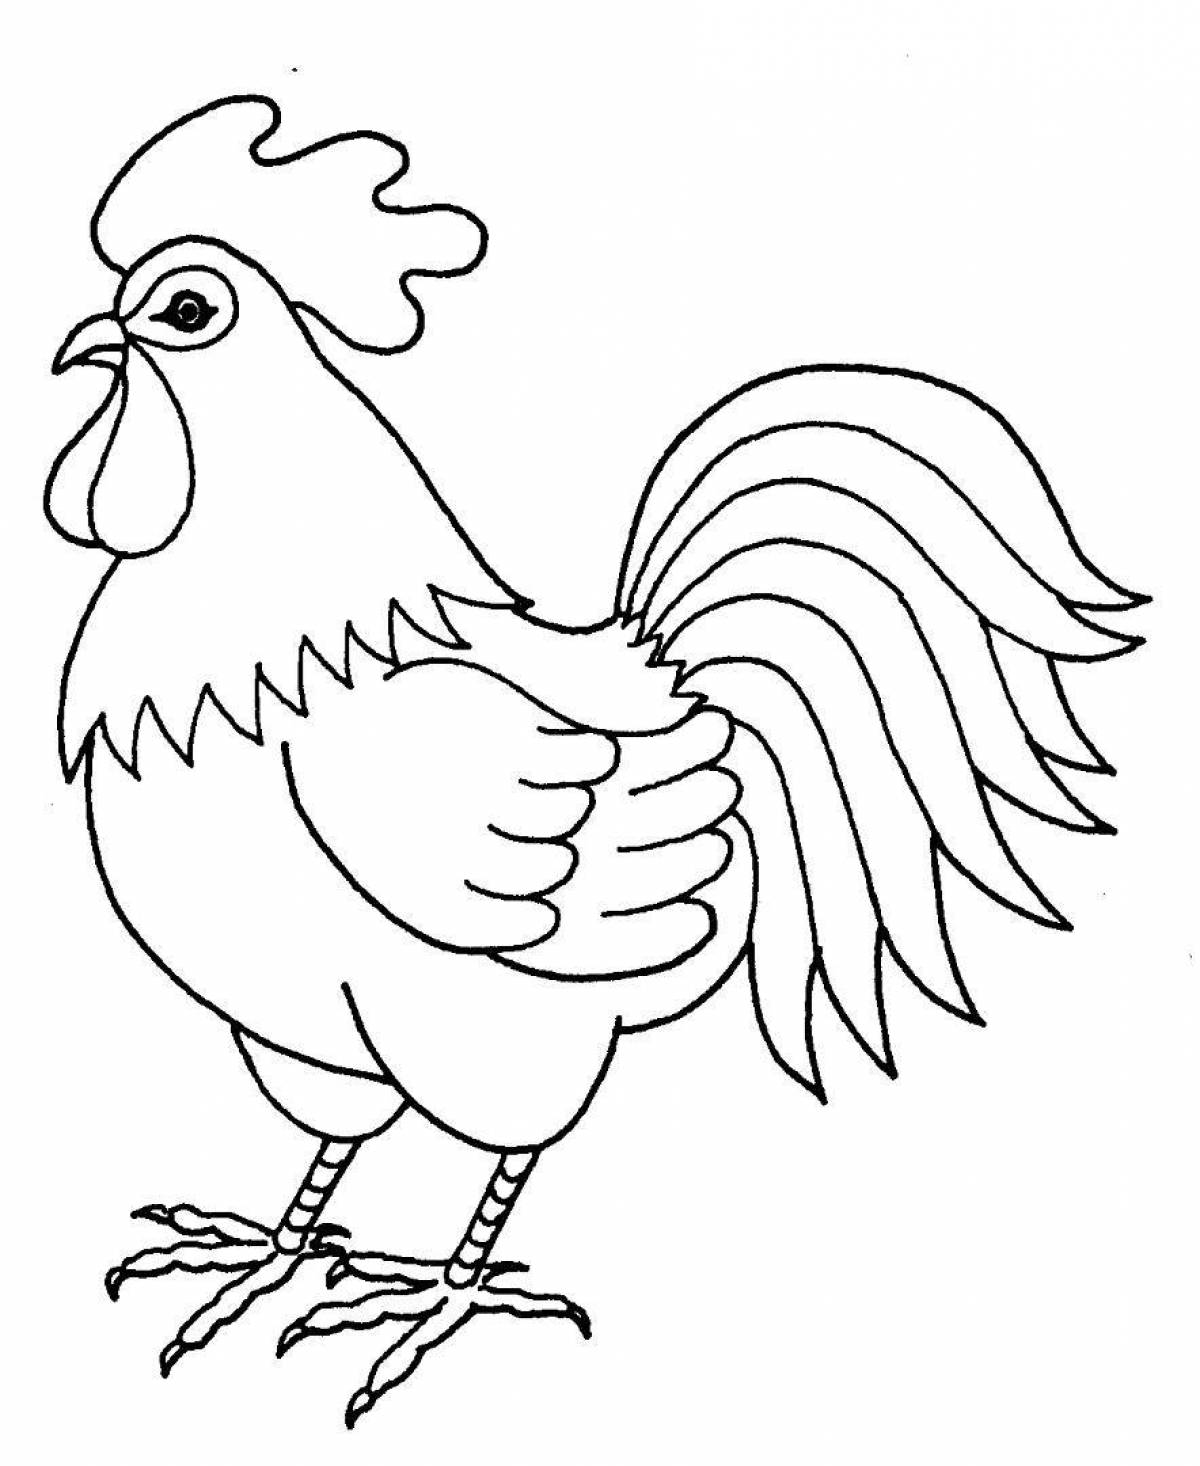 Shaped drawing of a cockerel for children